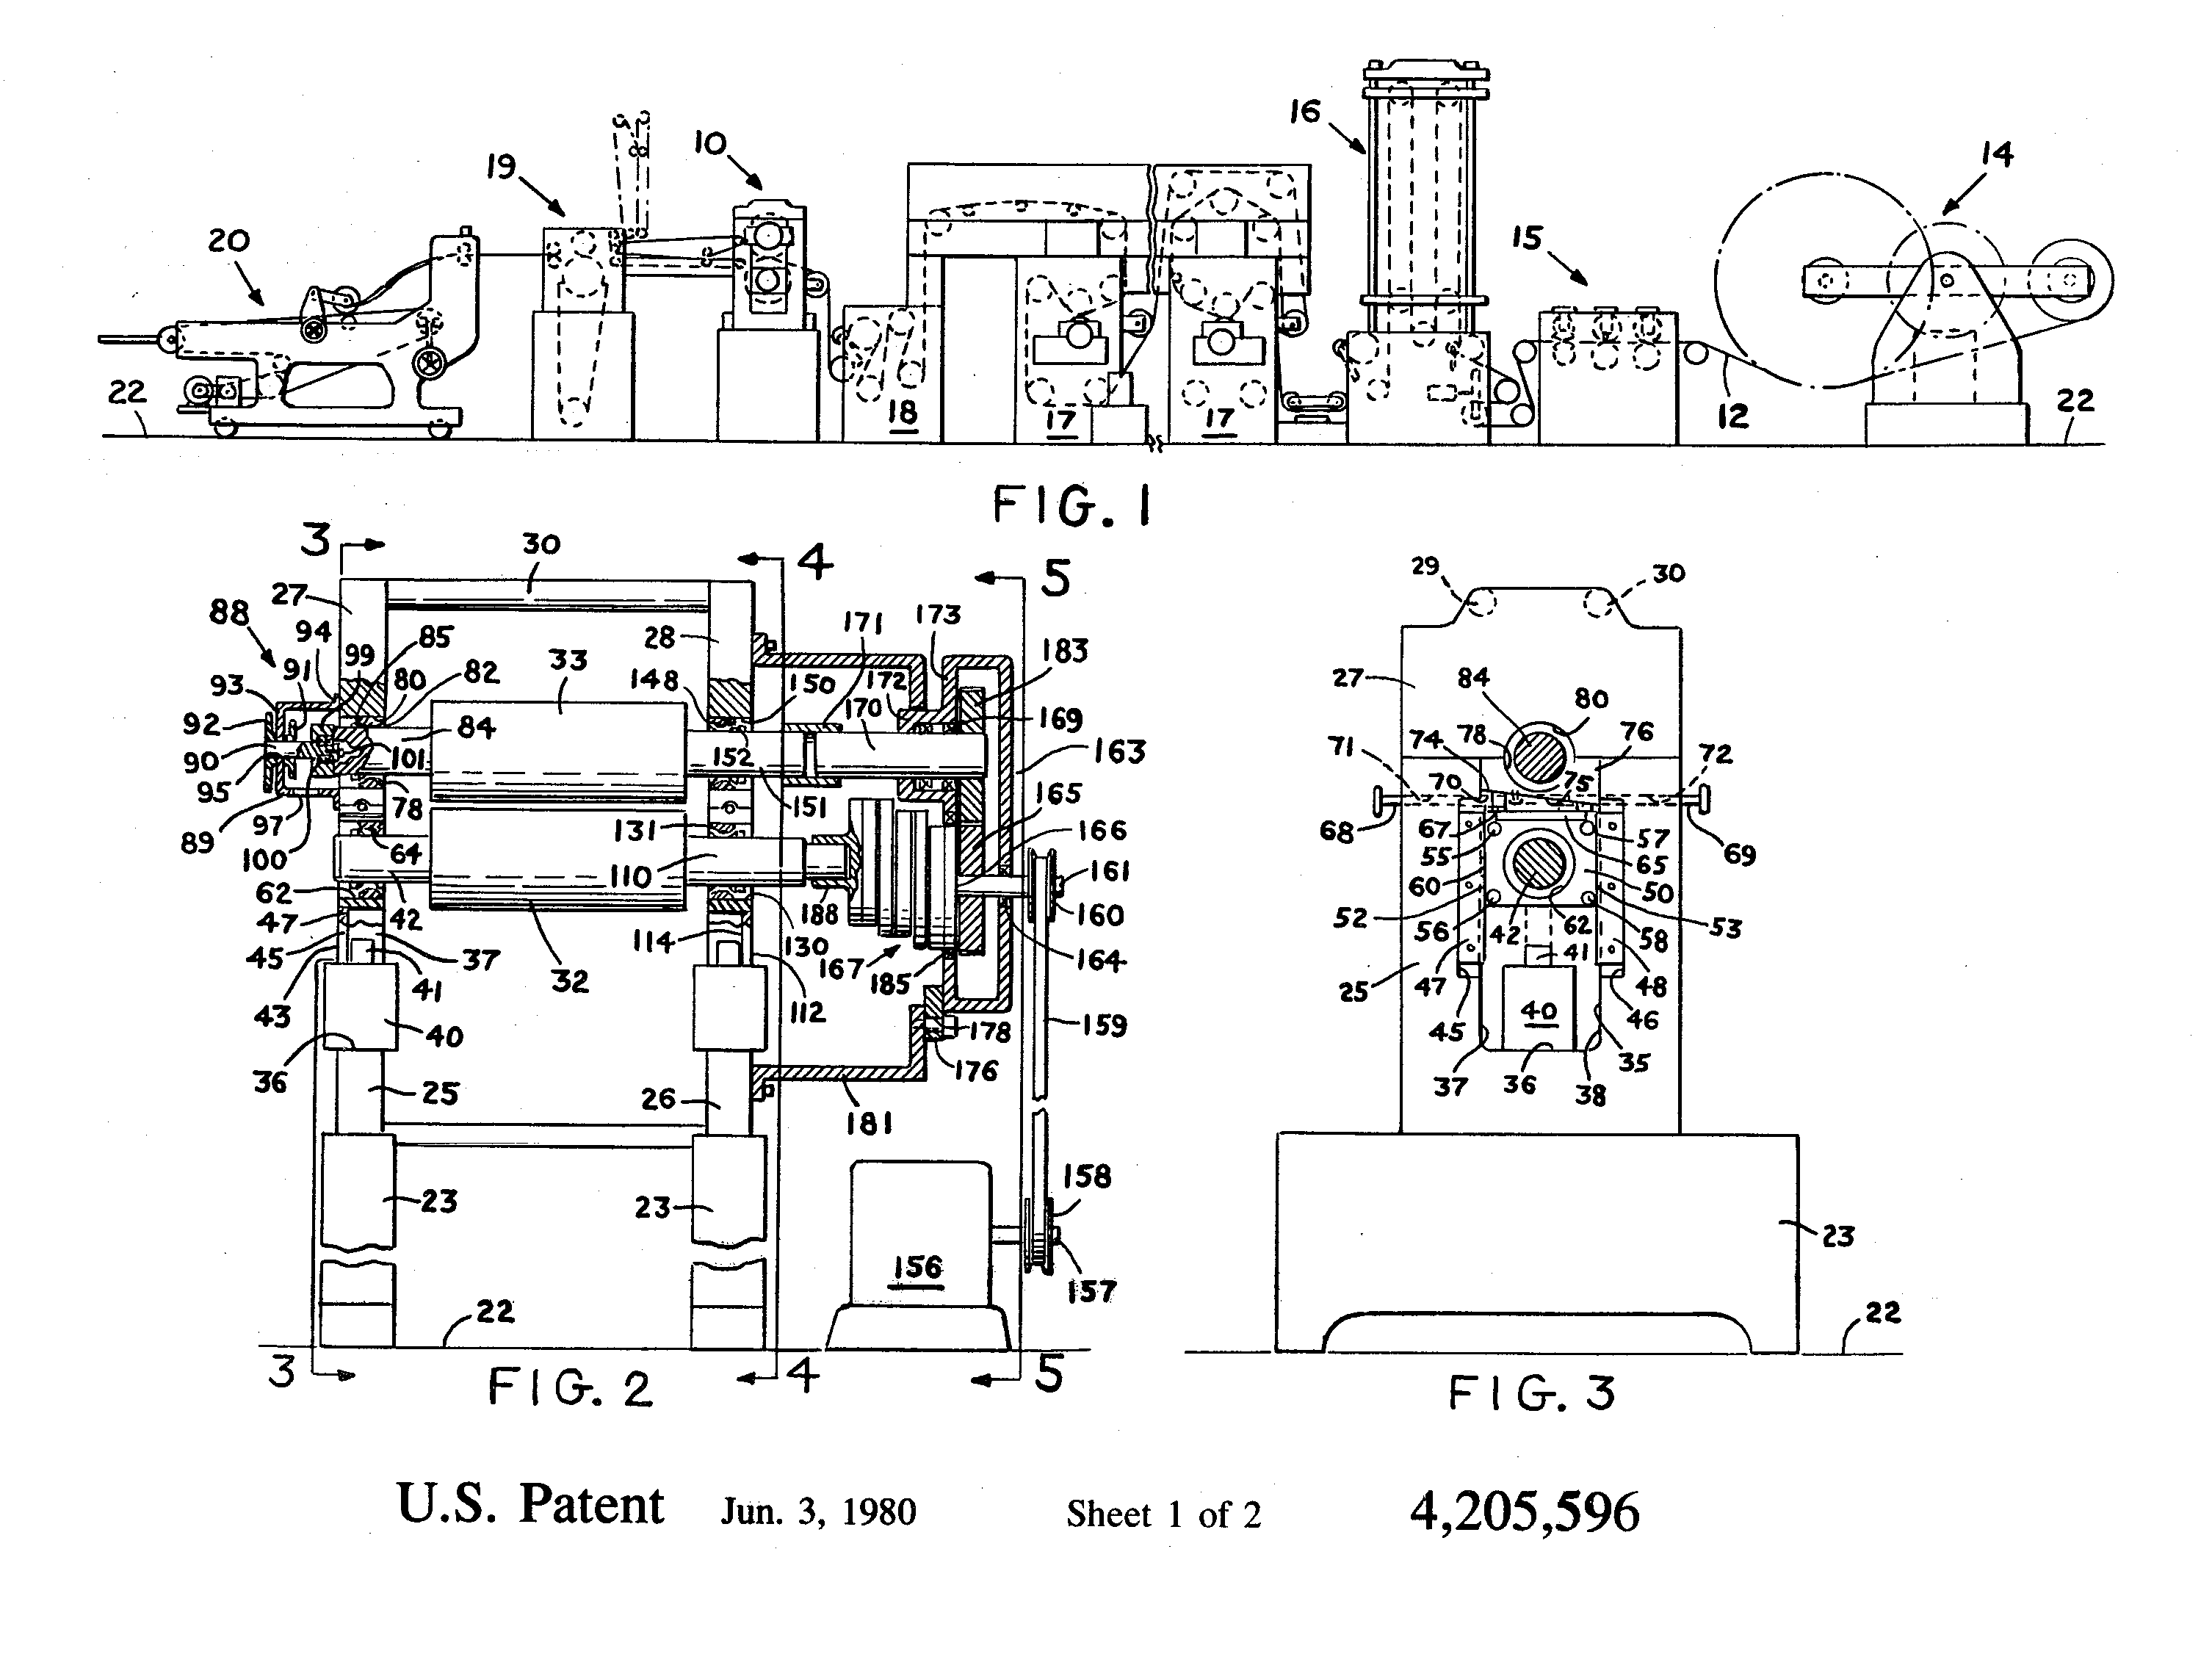 Patent blueprint showing one of the first officially documented rotary die cutting devices